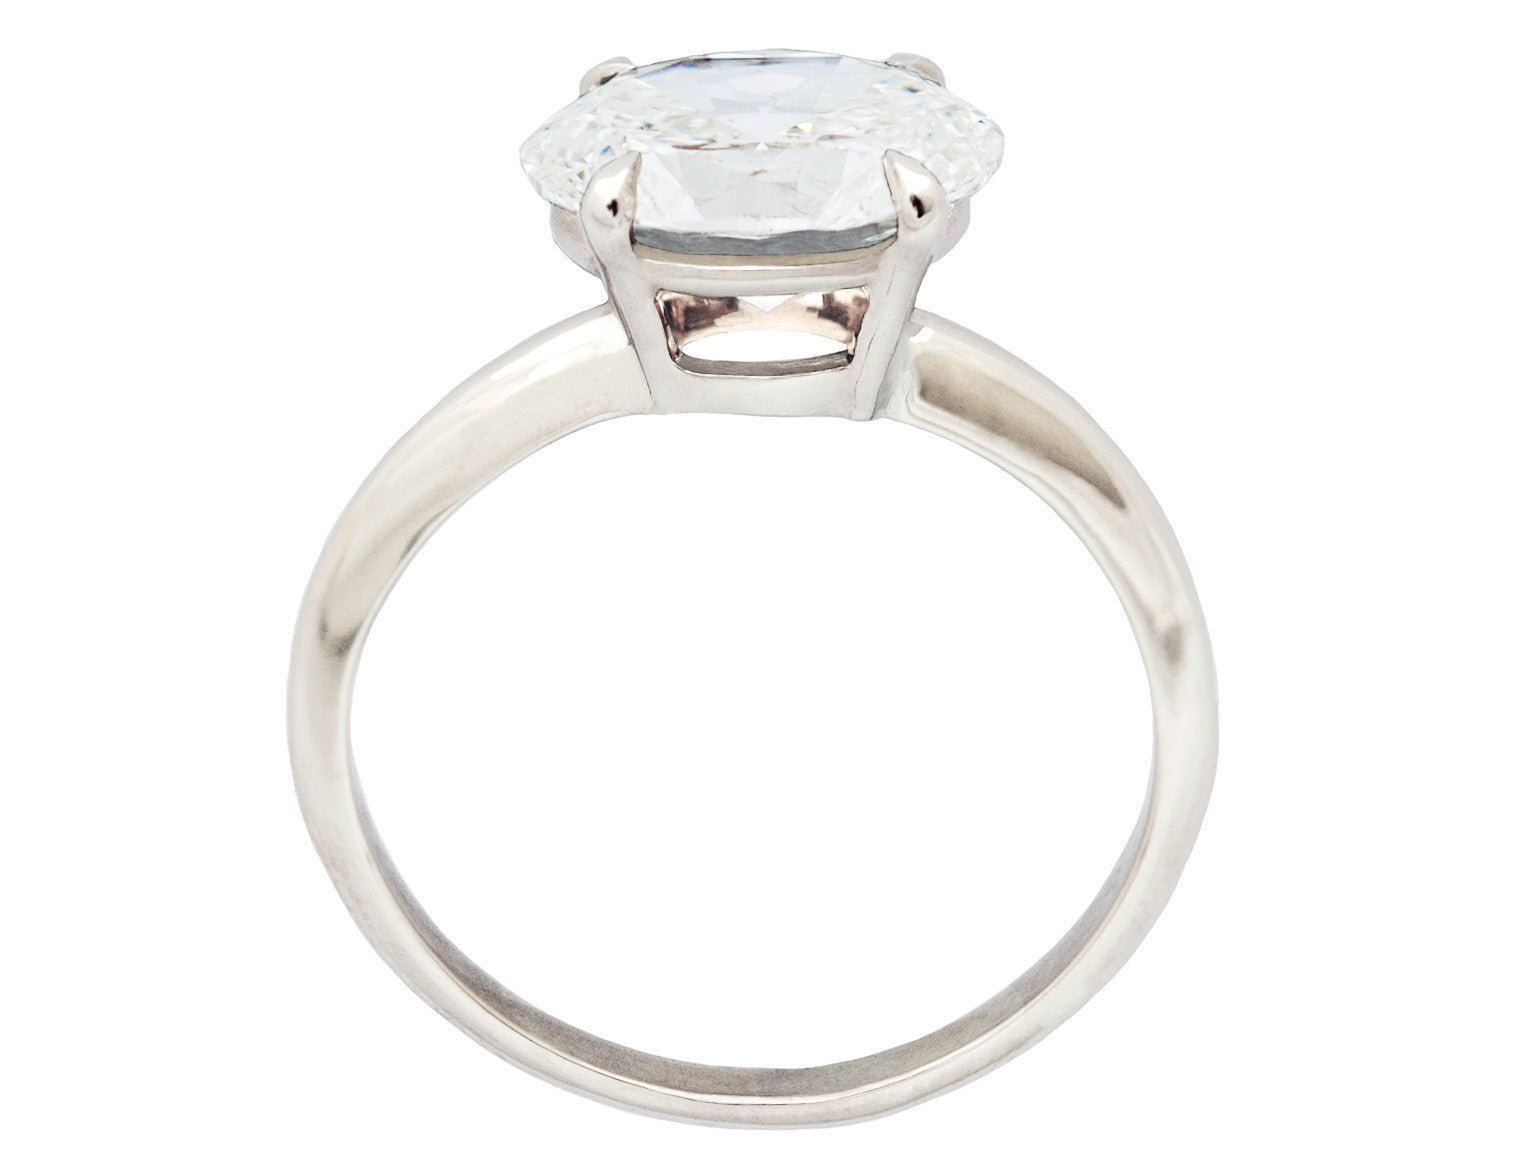 2 Carat Oval White Diamond Solitaire Ring